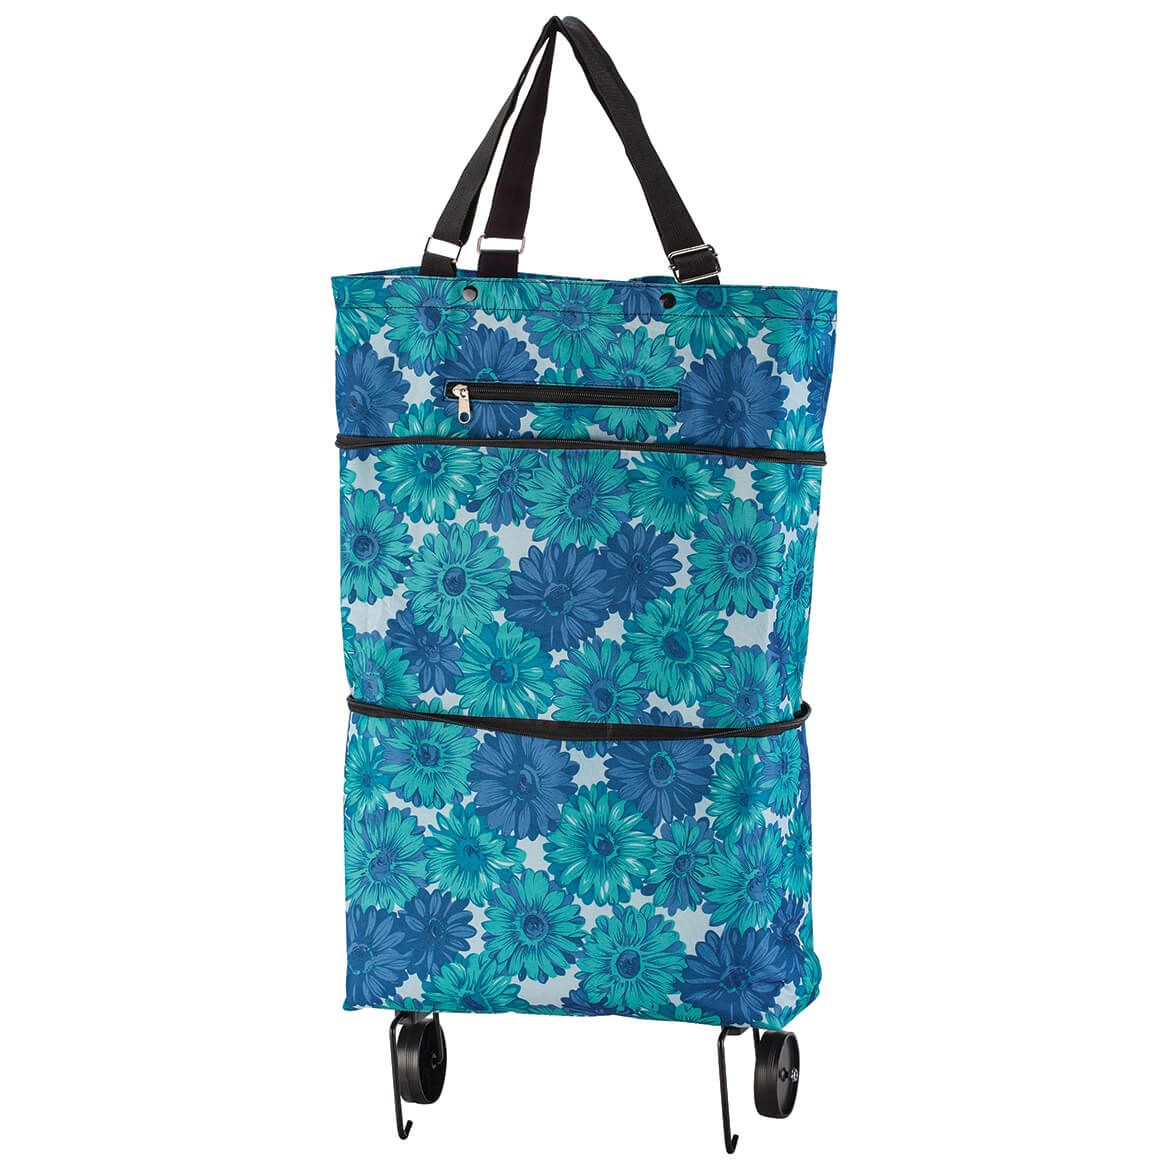 Collapsible Rolling Tote + '-' + 376826